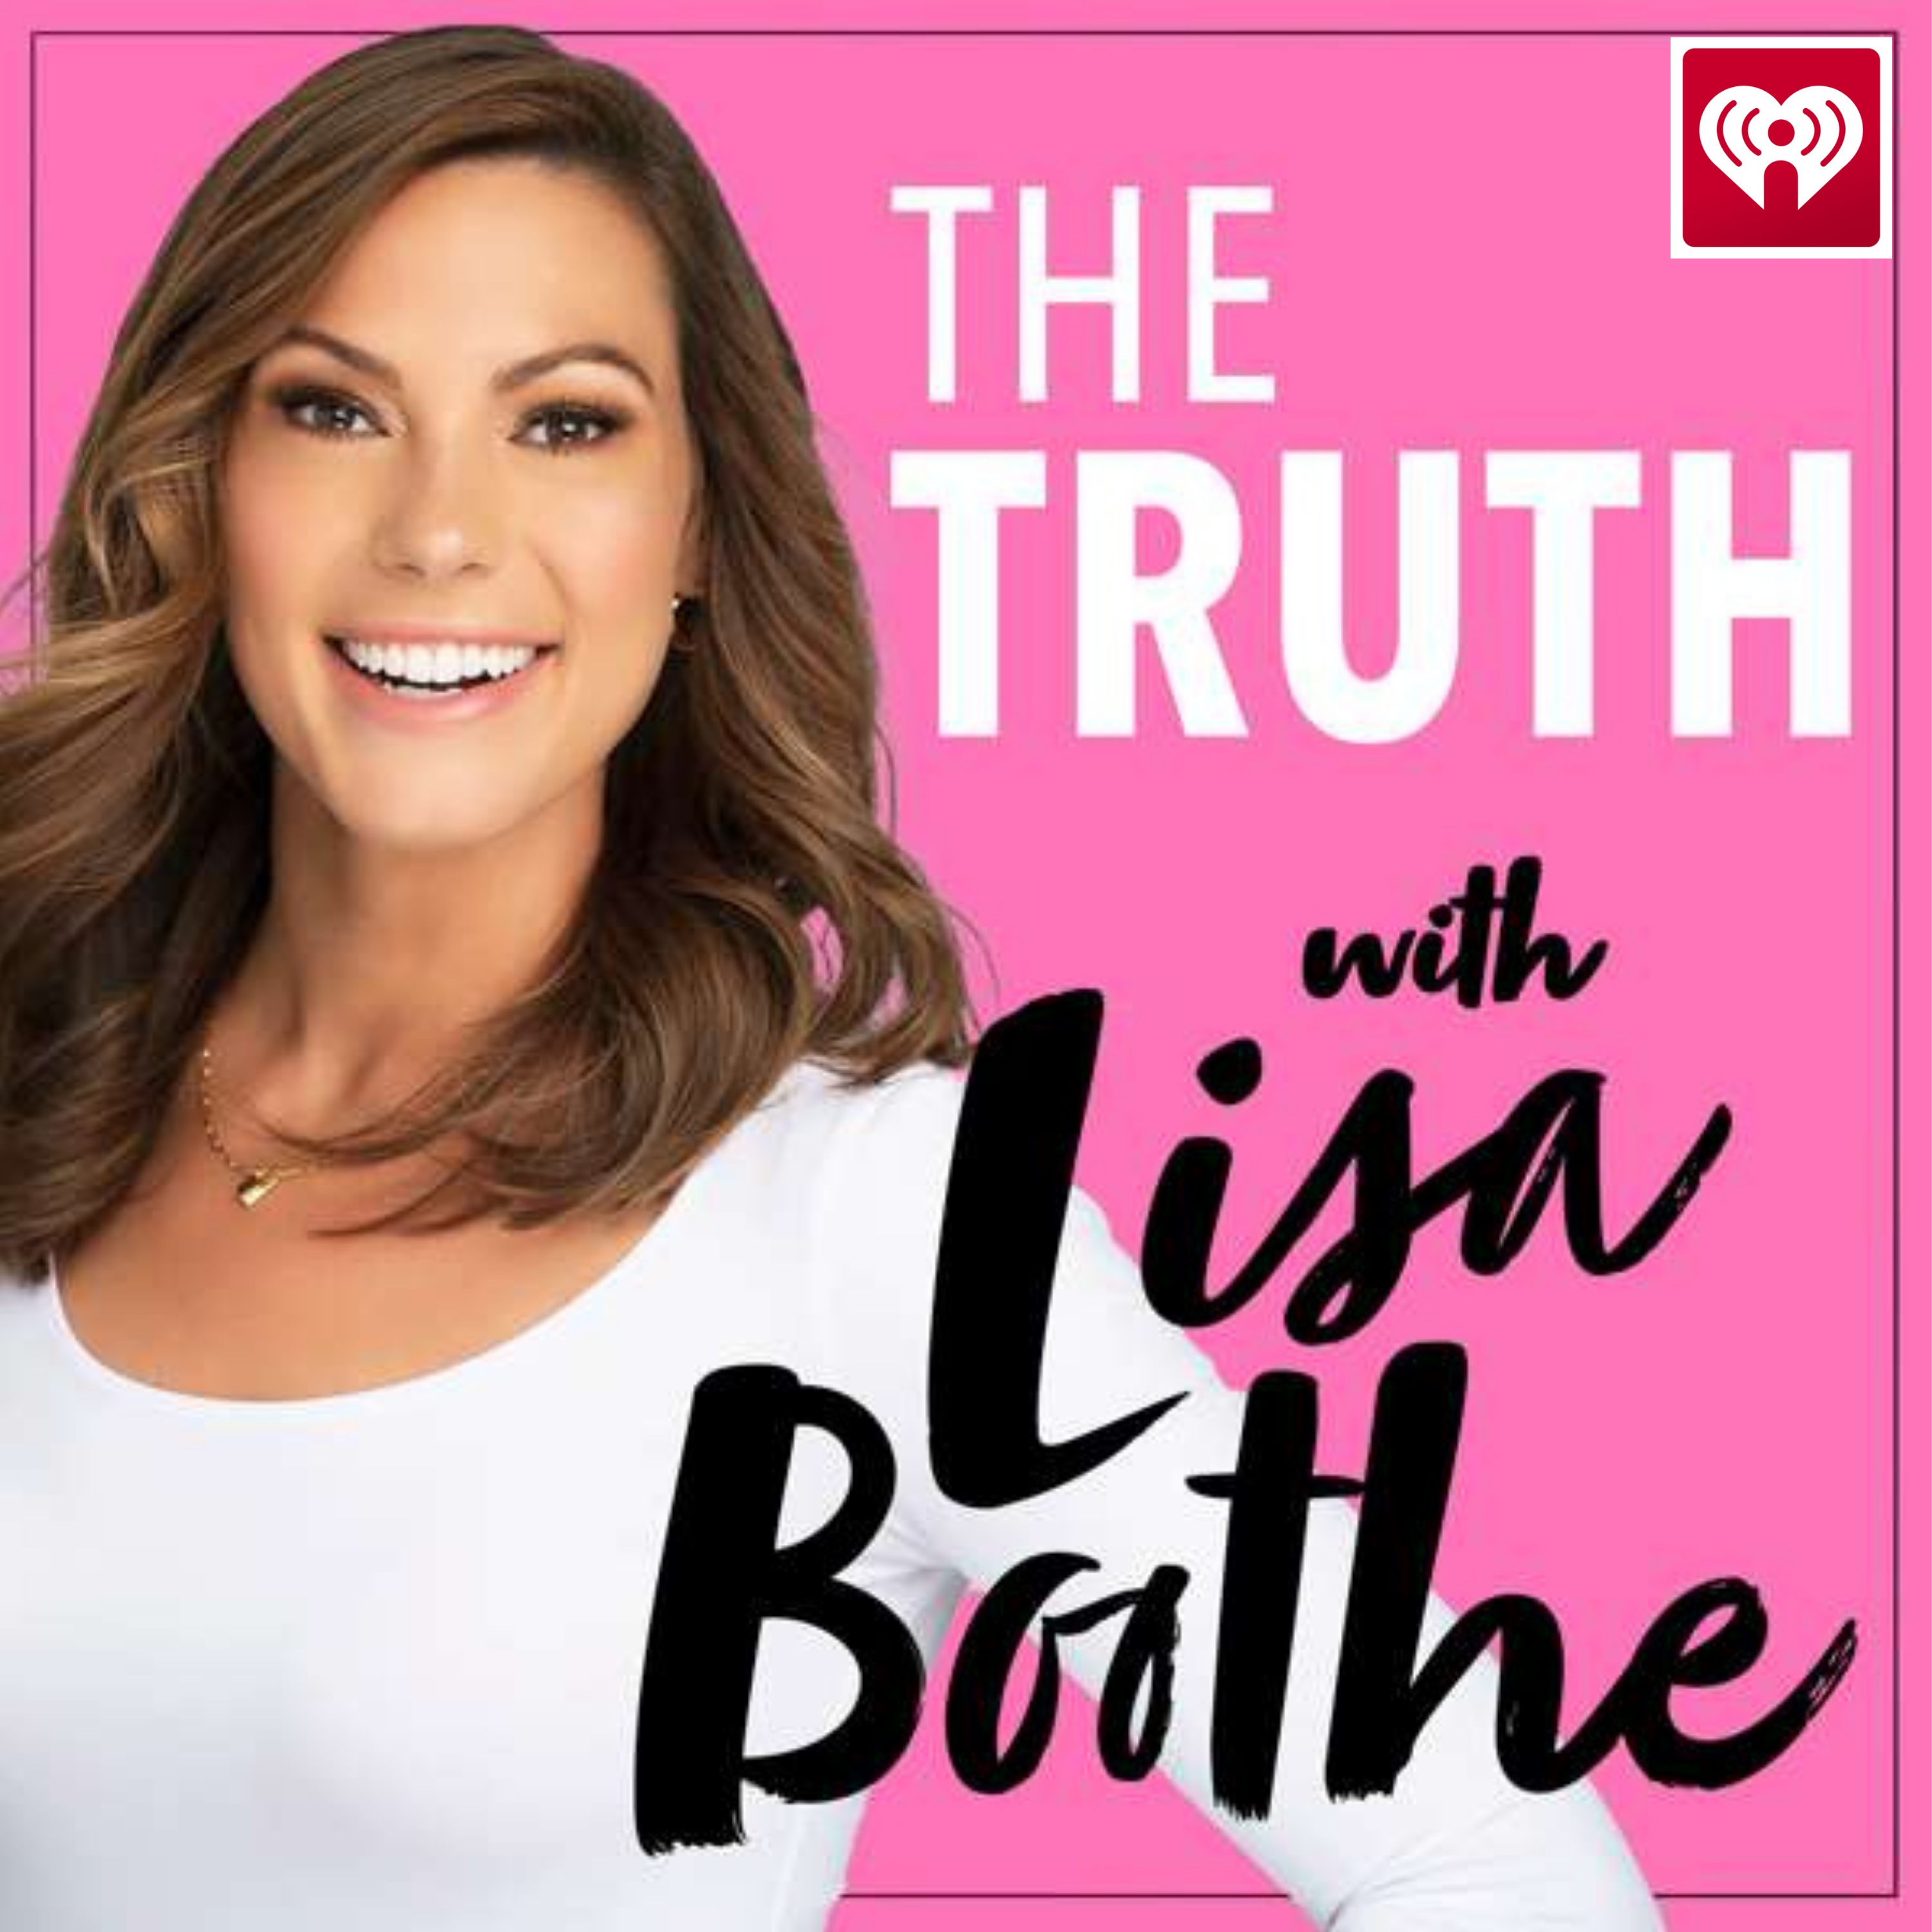 The Truth with Lisa Boothe:  Is the Media's Bias Impacting Public Trust with Ari Fleischer